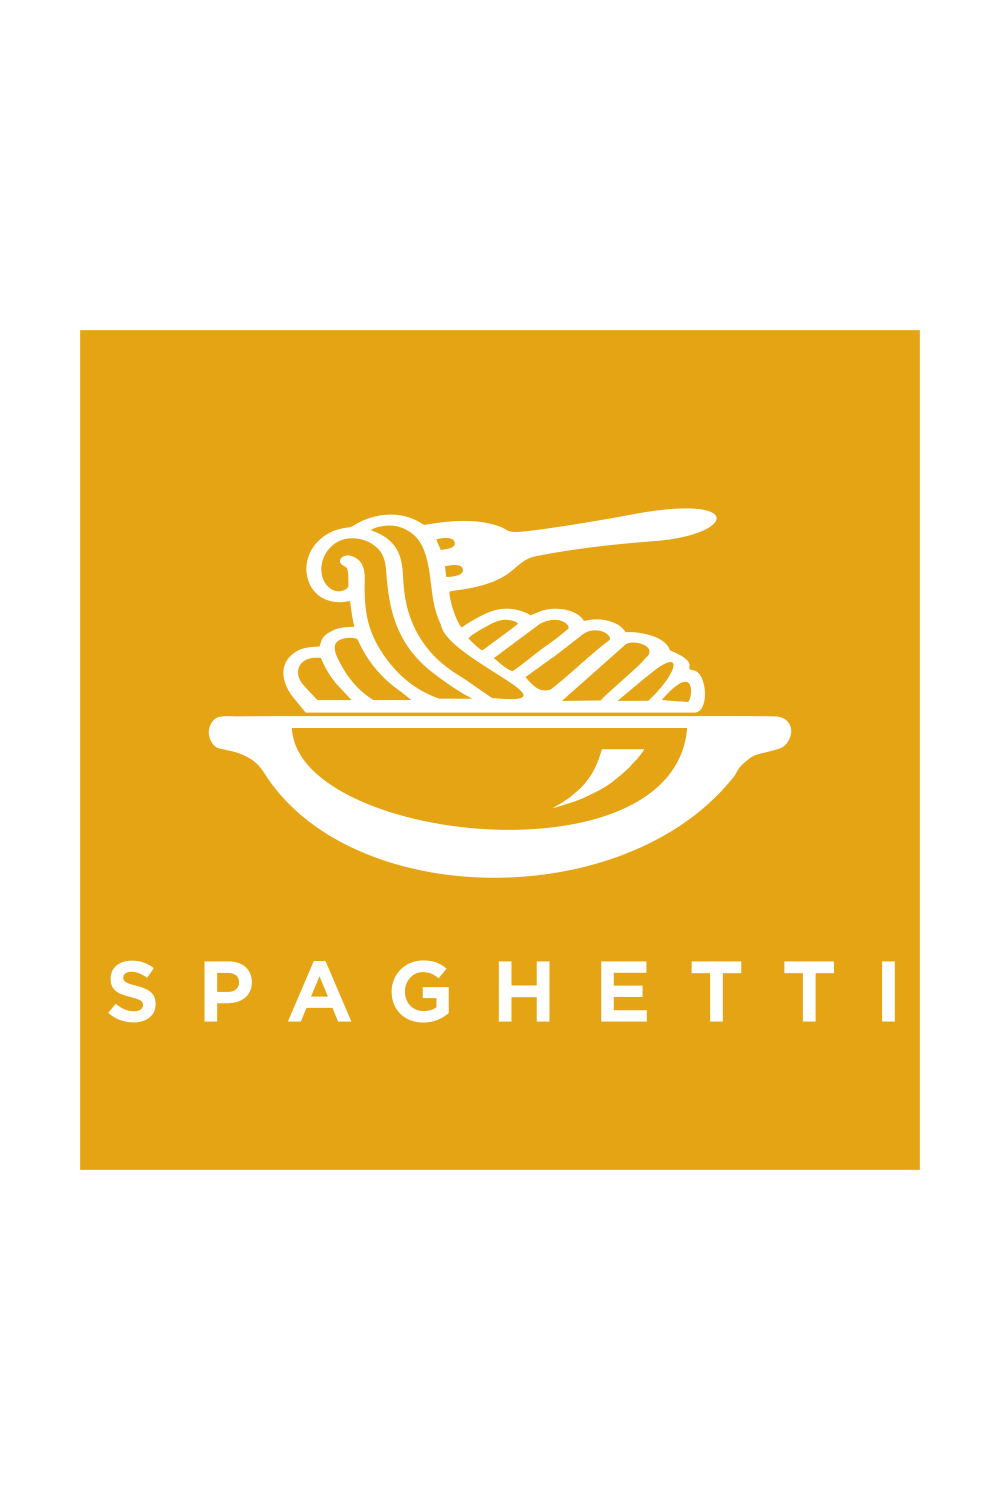 Pastas icon or logo isolated on white Vector stylized Spaghetti or noodle with fork template for internet, design, decoration Authentic Italian food pinterest preview image.